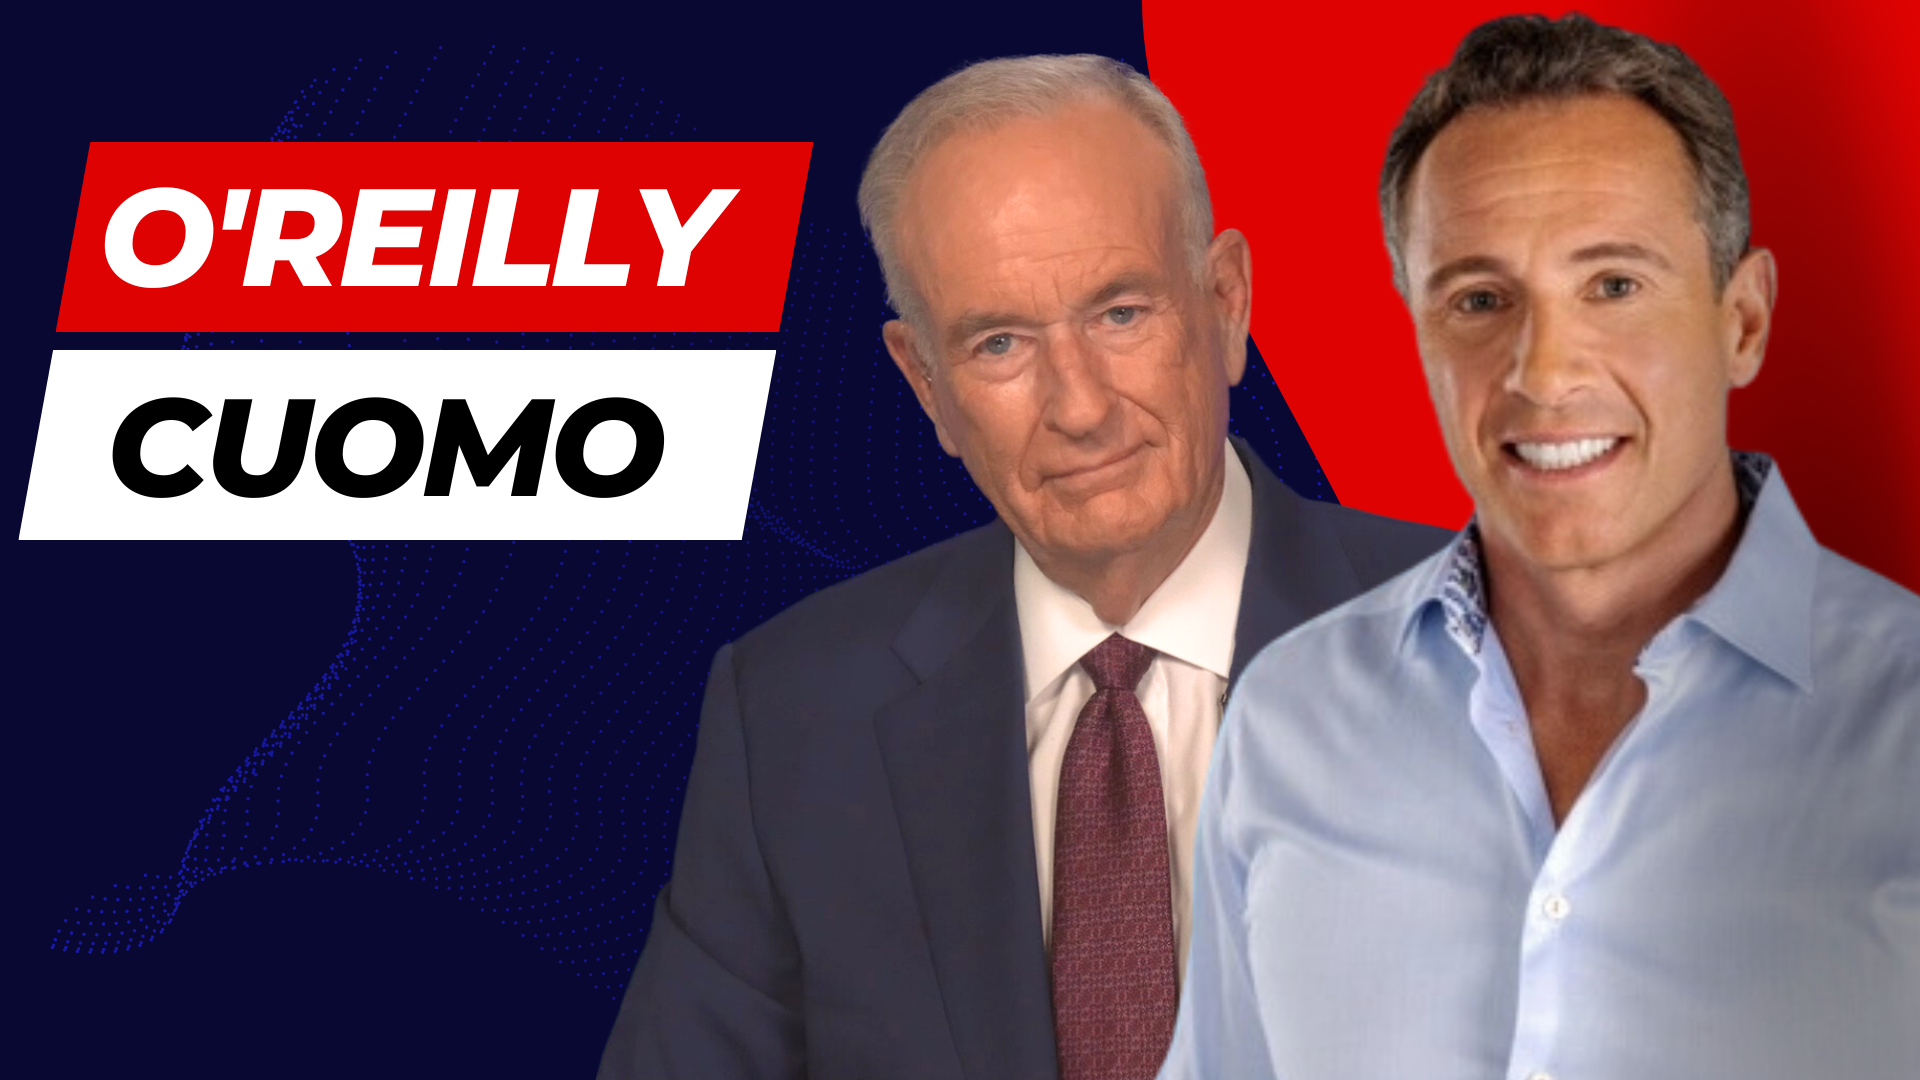 O'Reilly and Cuomo on the 'Trouble' Biden is Facing